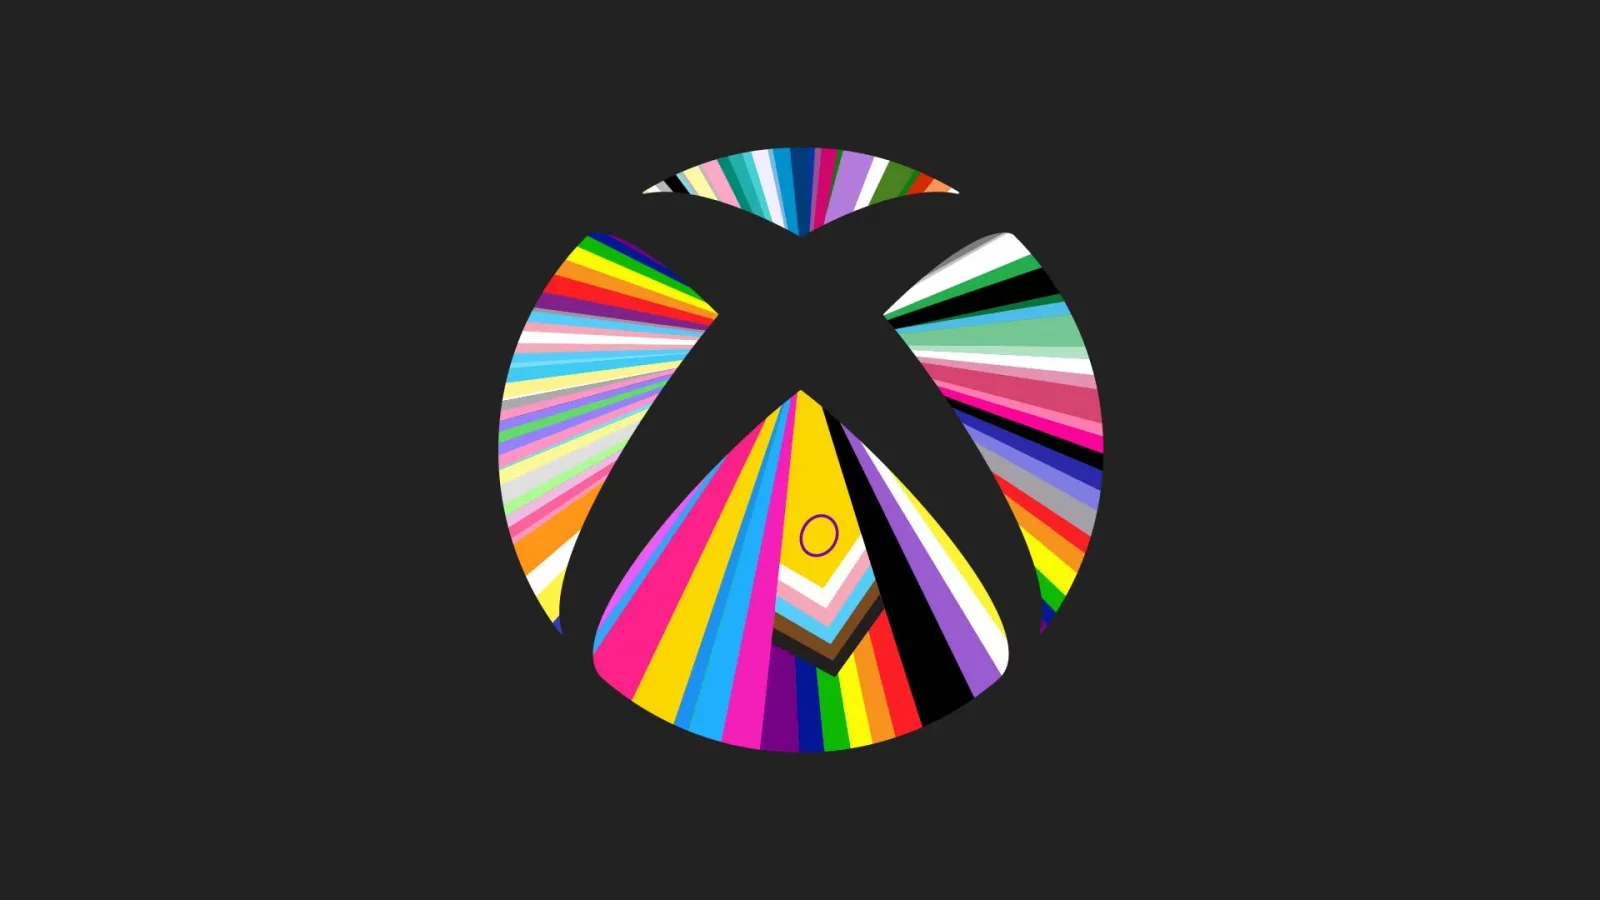 Xbox comes with special Pride controller and more.webp